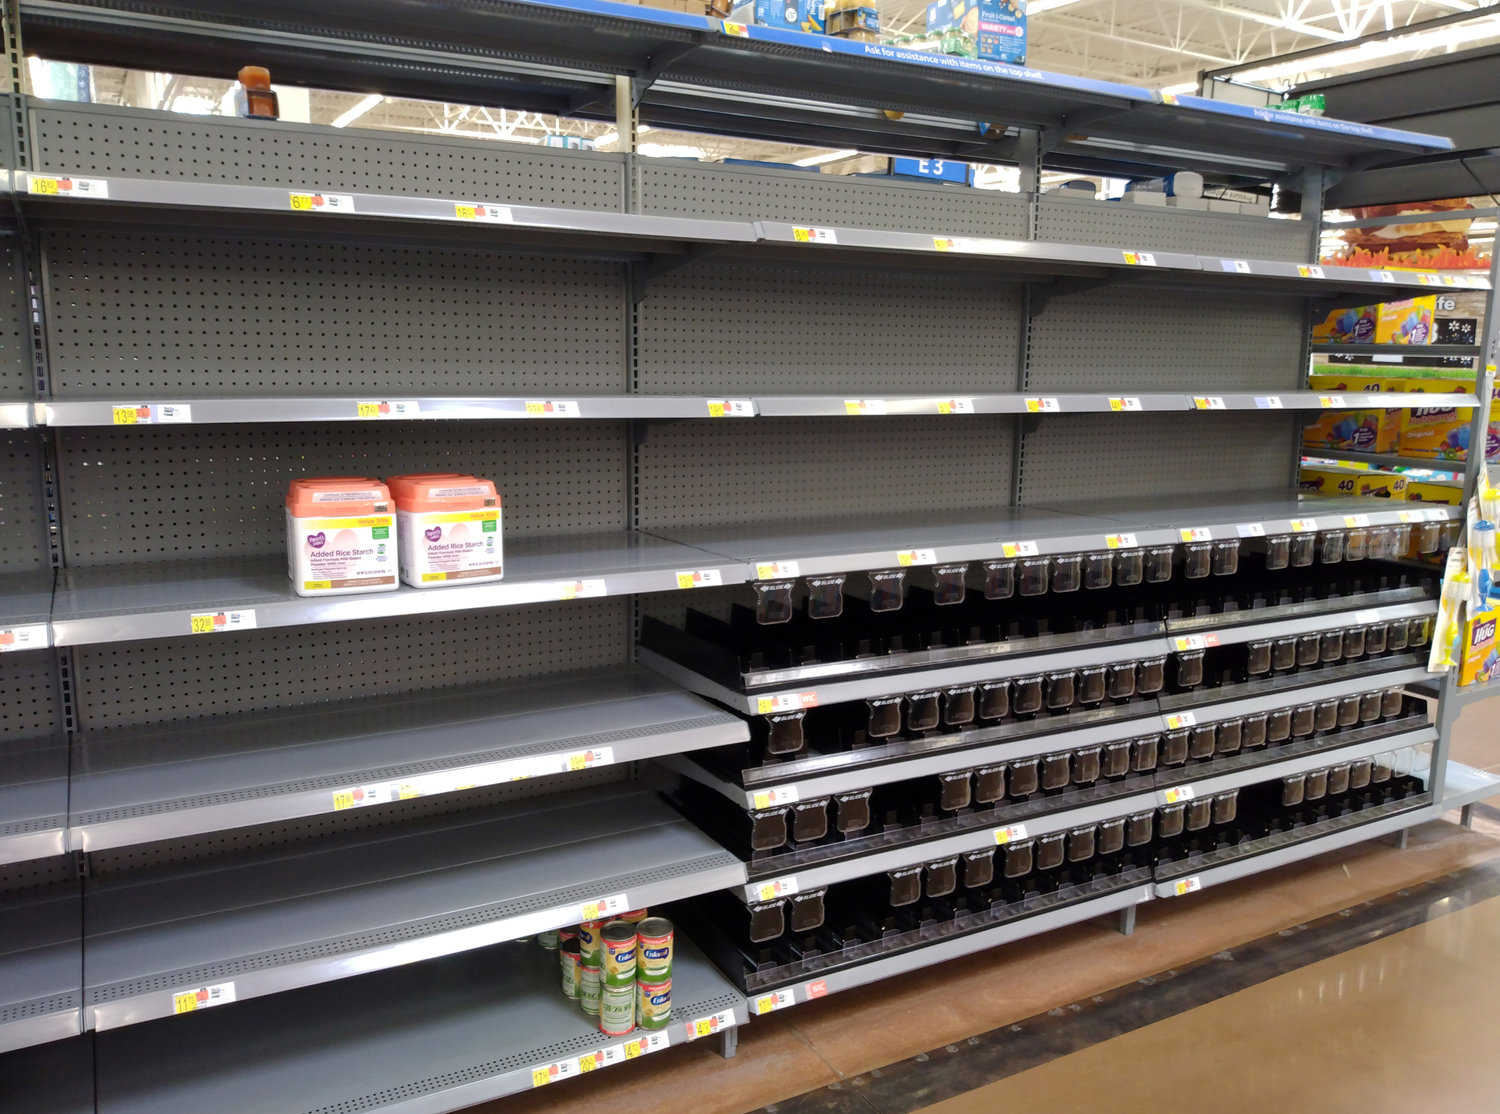 Shelves for baby formula sit almost completely empty May 14, 2022, at a Walmart store in Dallas, Ga. (Index/Henry Durand, File)